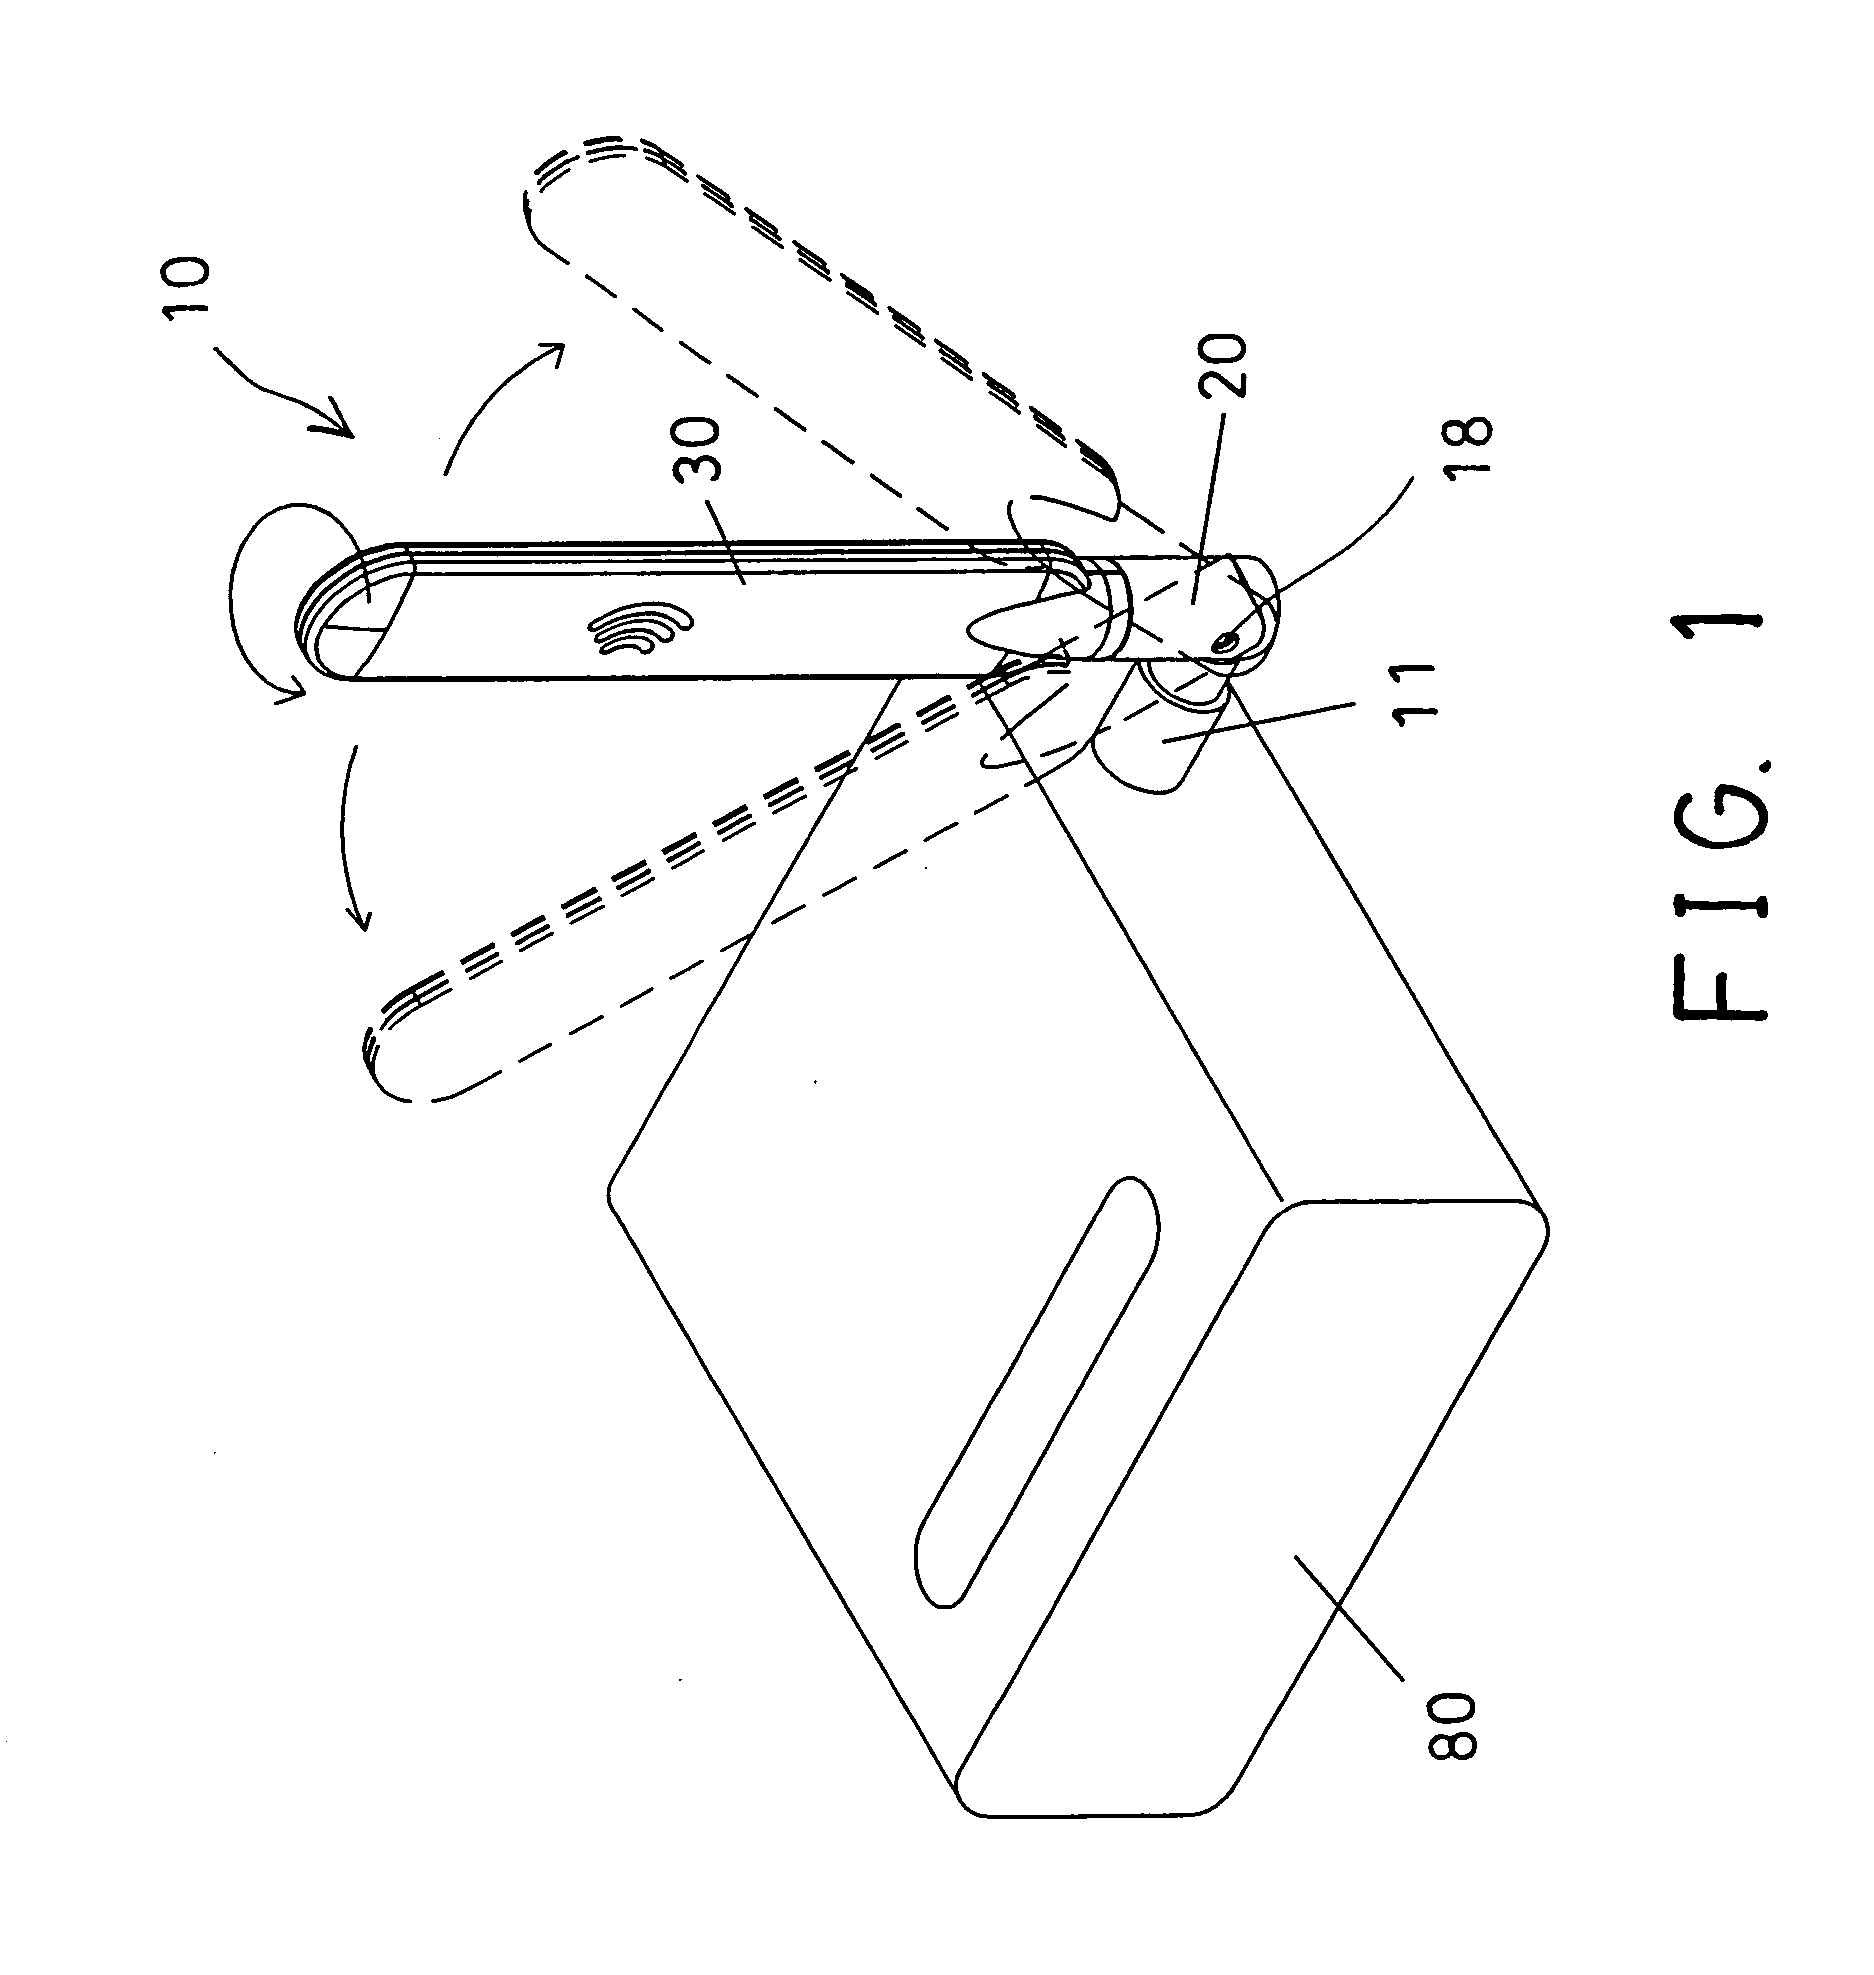 Antenna device having rotatable structure